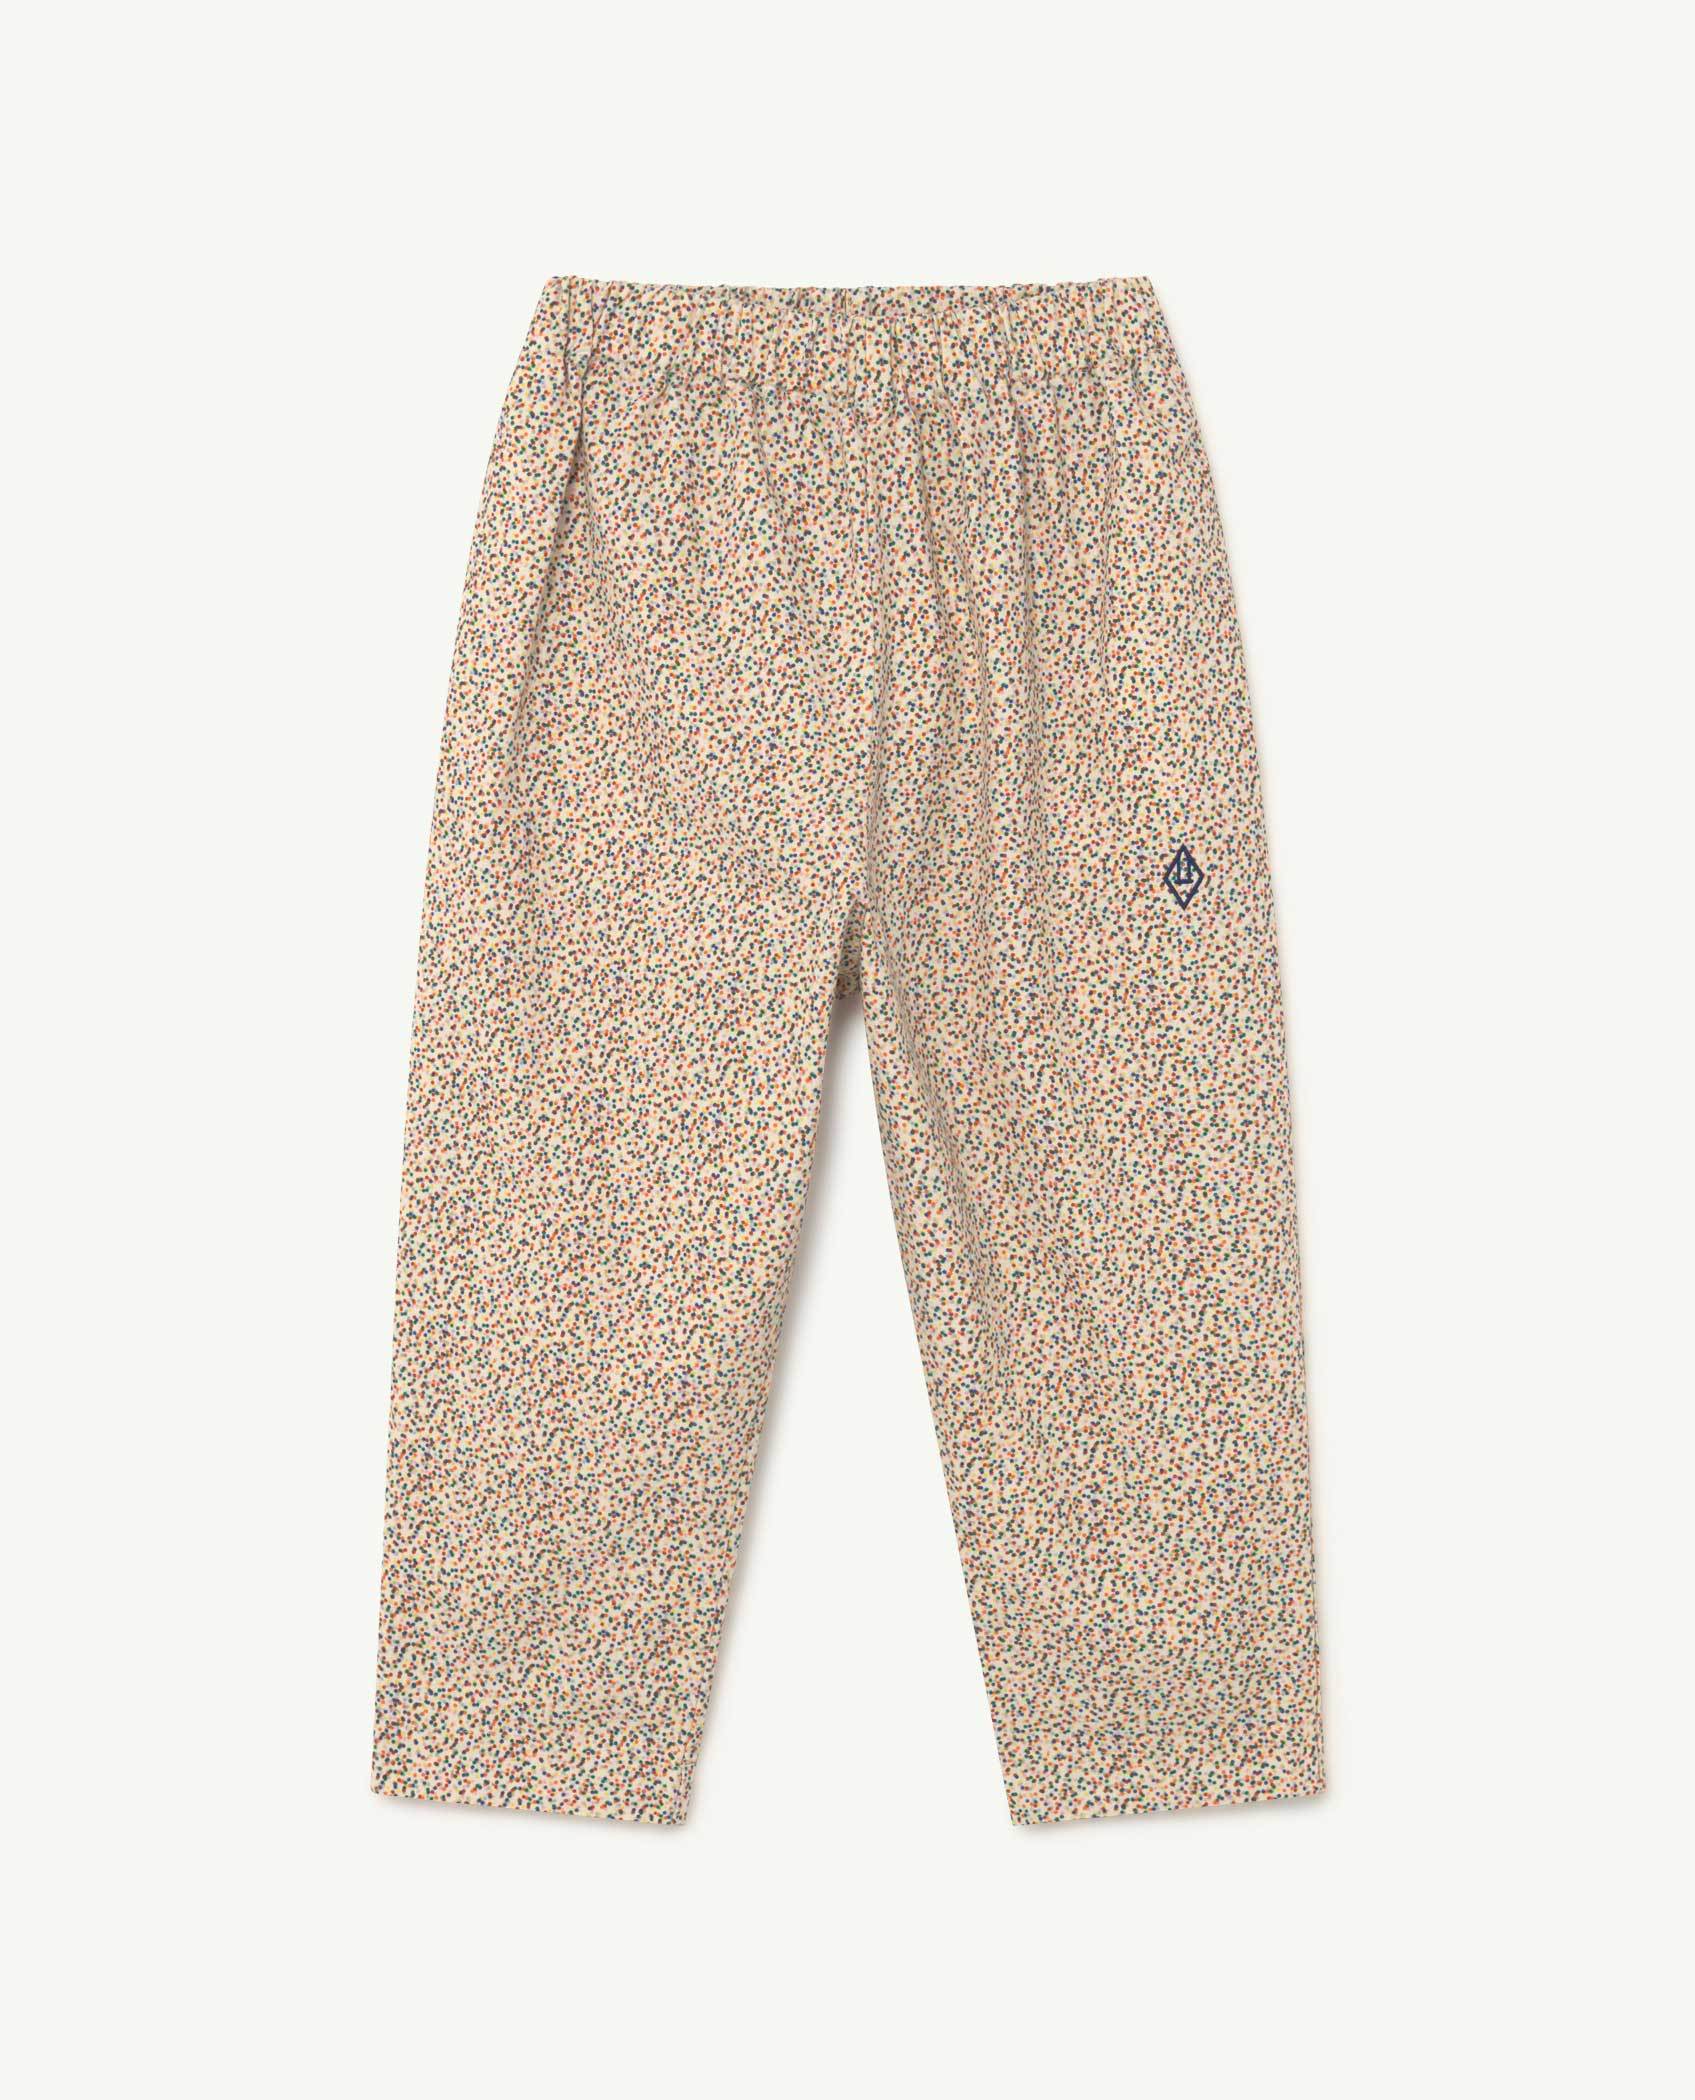 White Dots Elephant Trousers PRODUCT FRONT